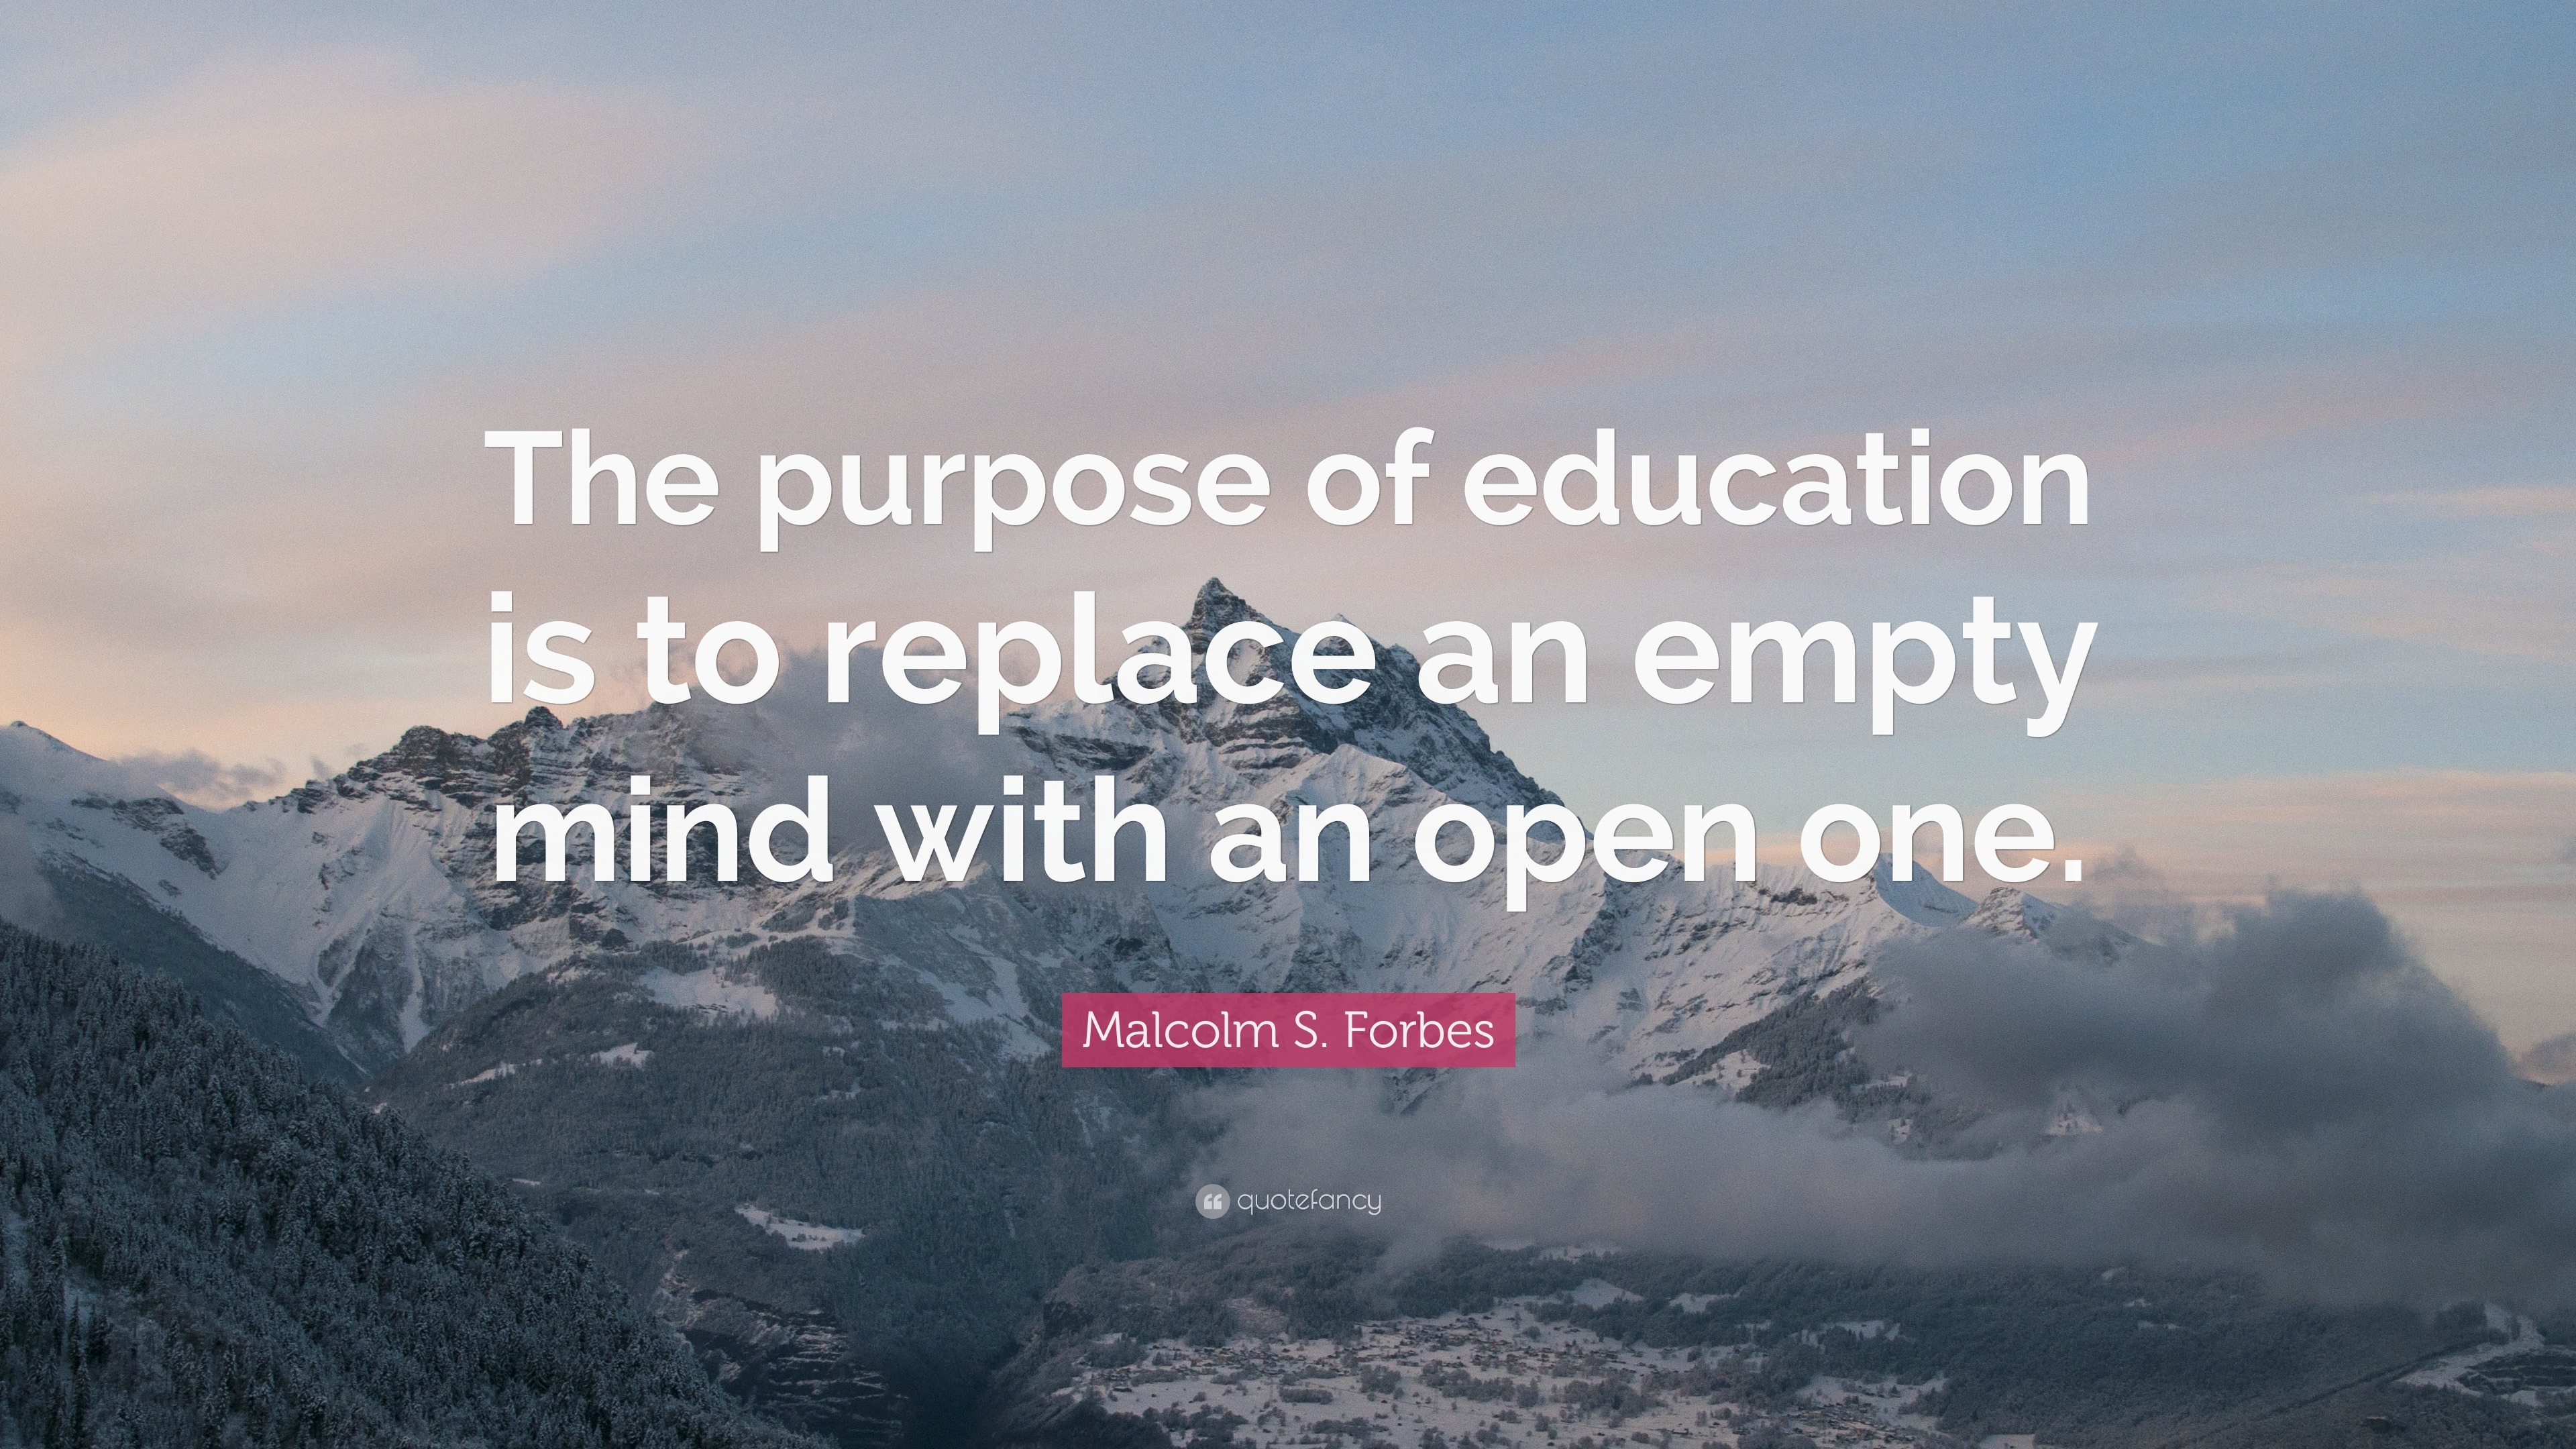 famous literary quotes about education